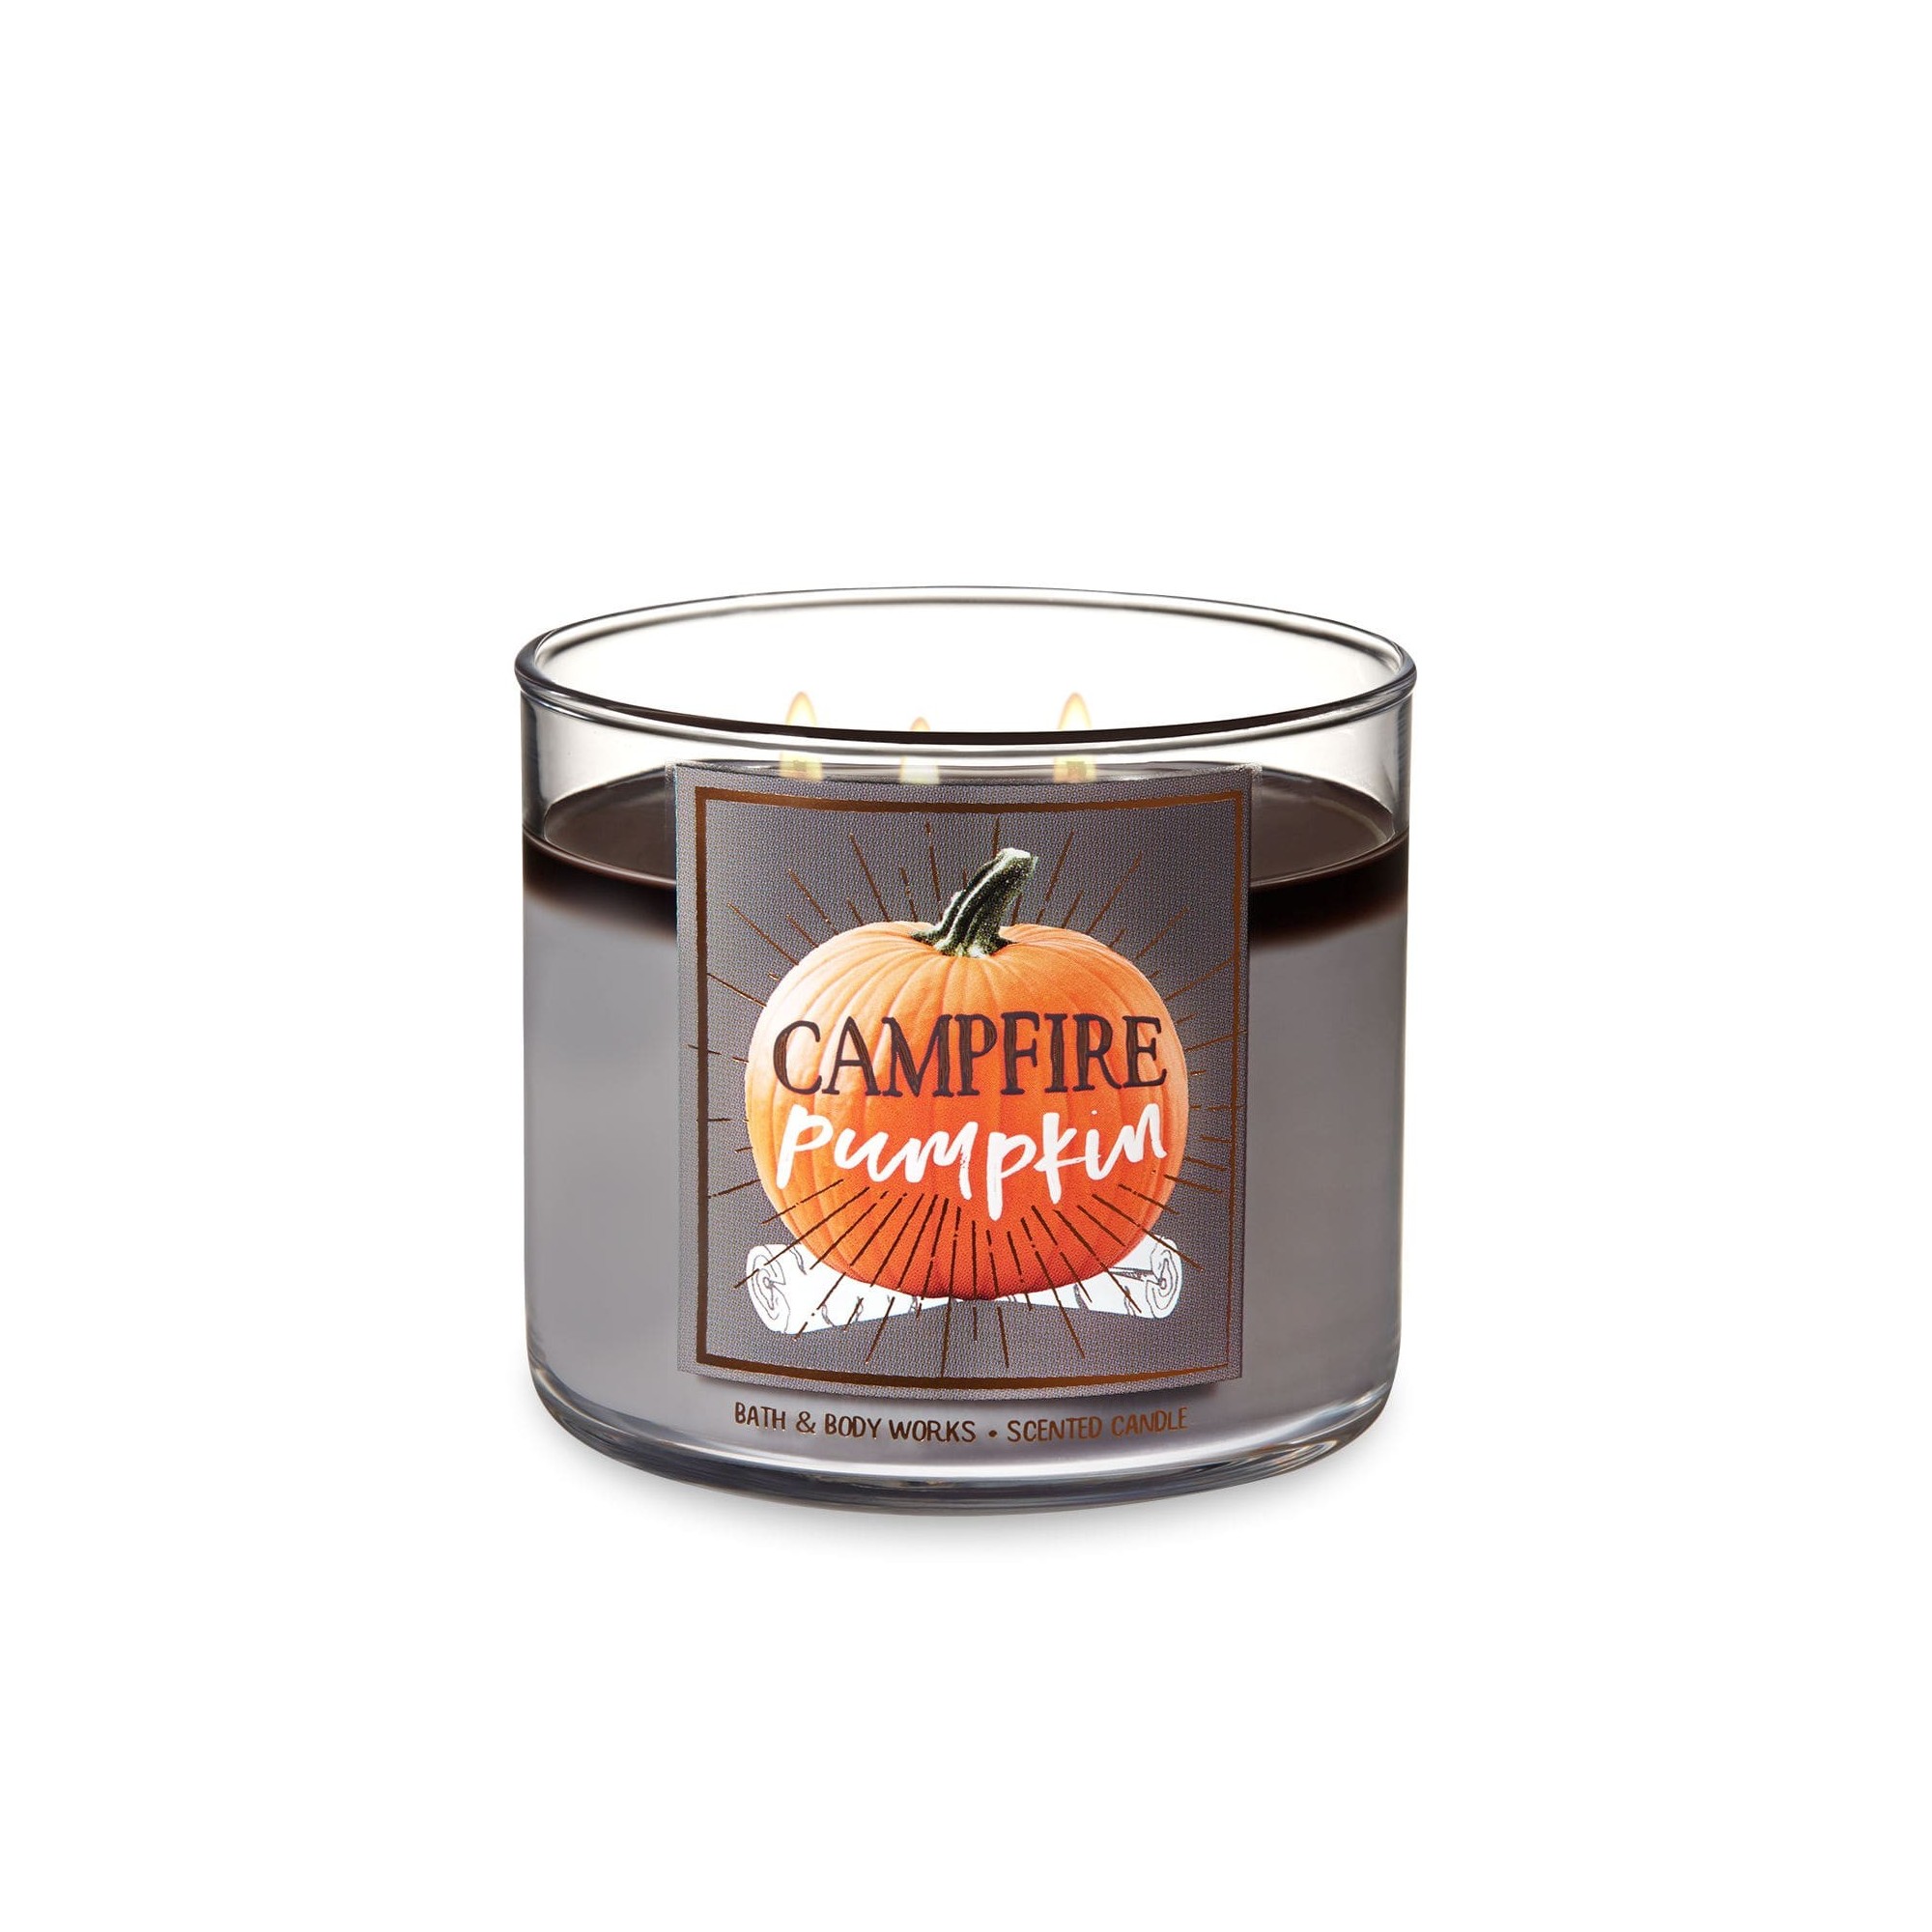 Bath & Body Works Campfire Pumpkin 3 Wick Scented Candle